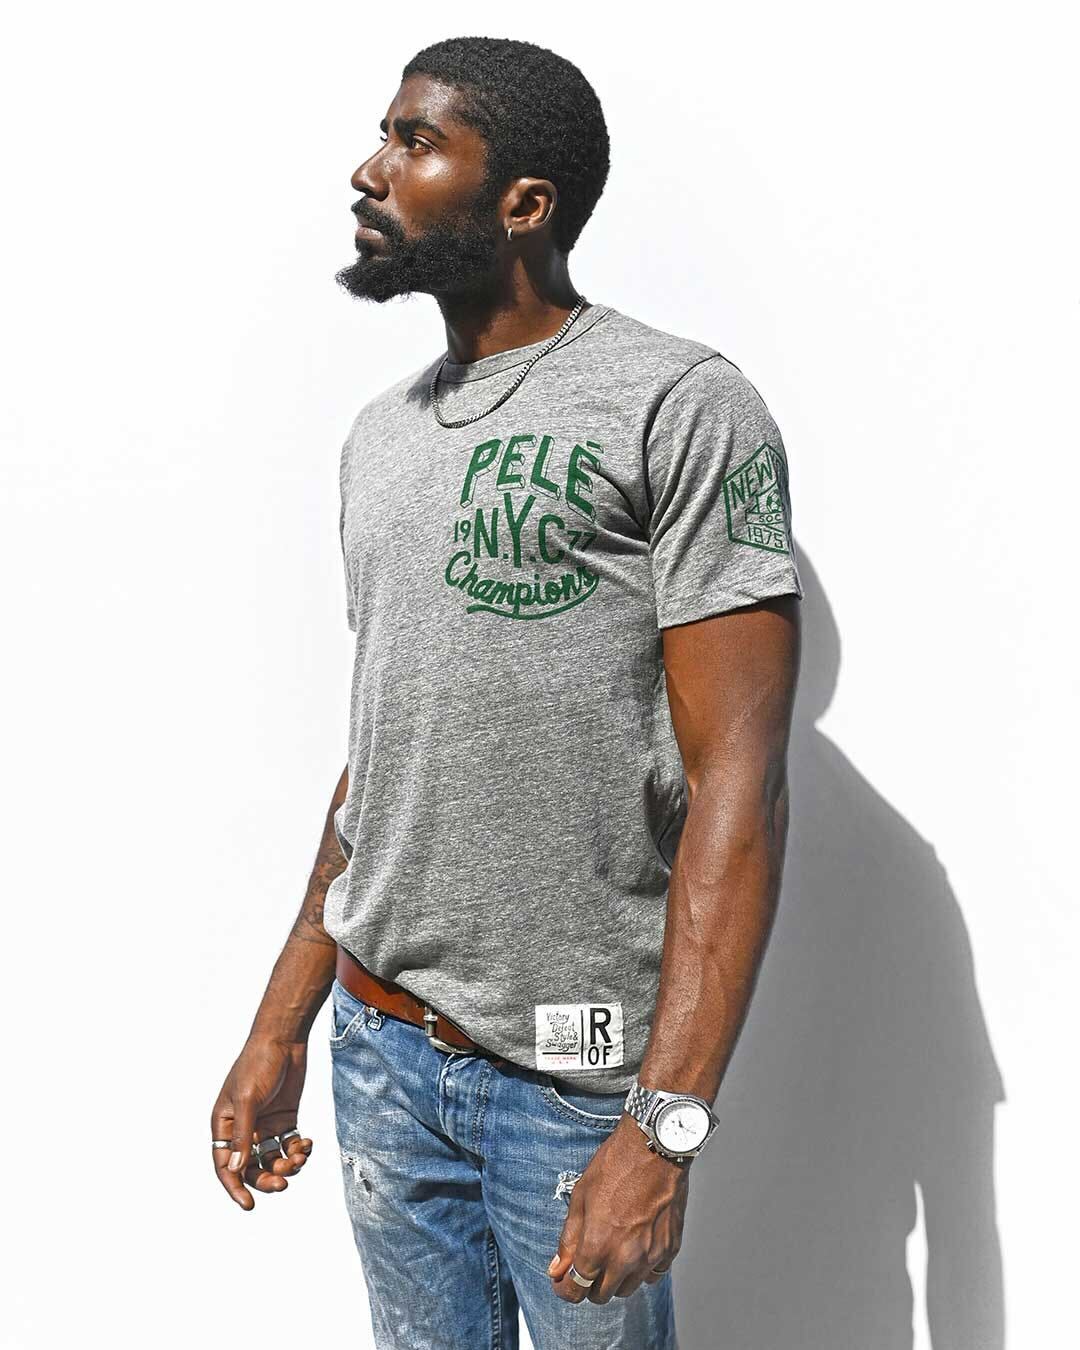 Pelé NYC Champ 1977 Grey Tee - Roots of Fight Canada